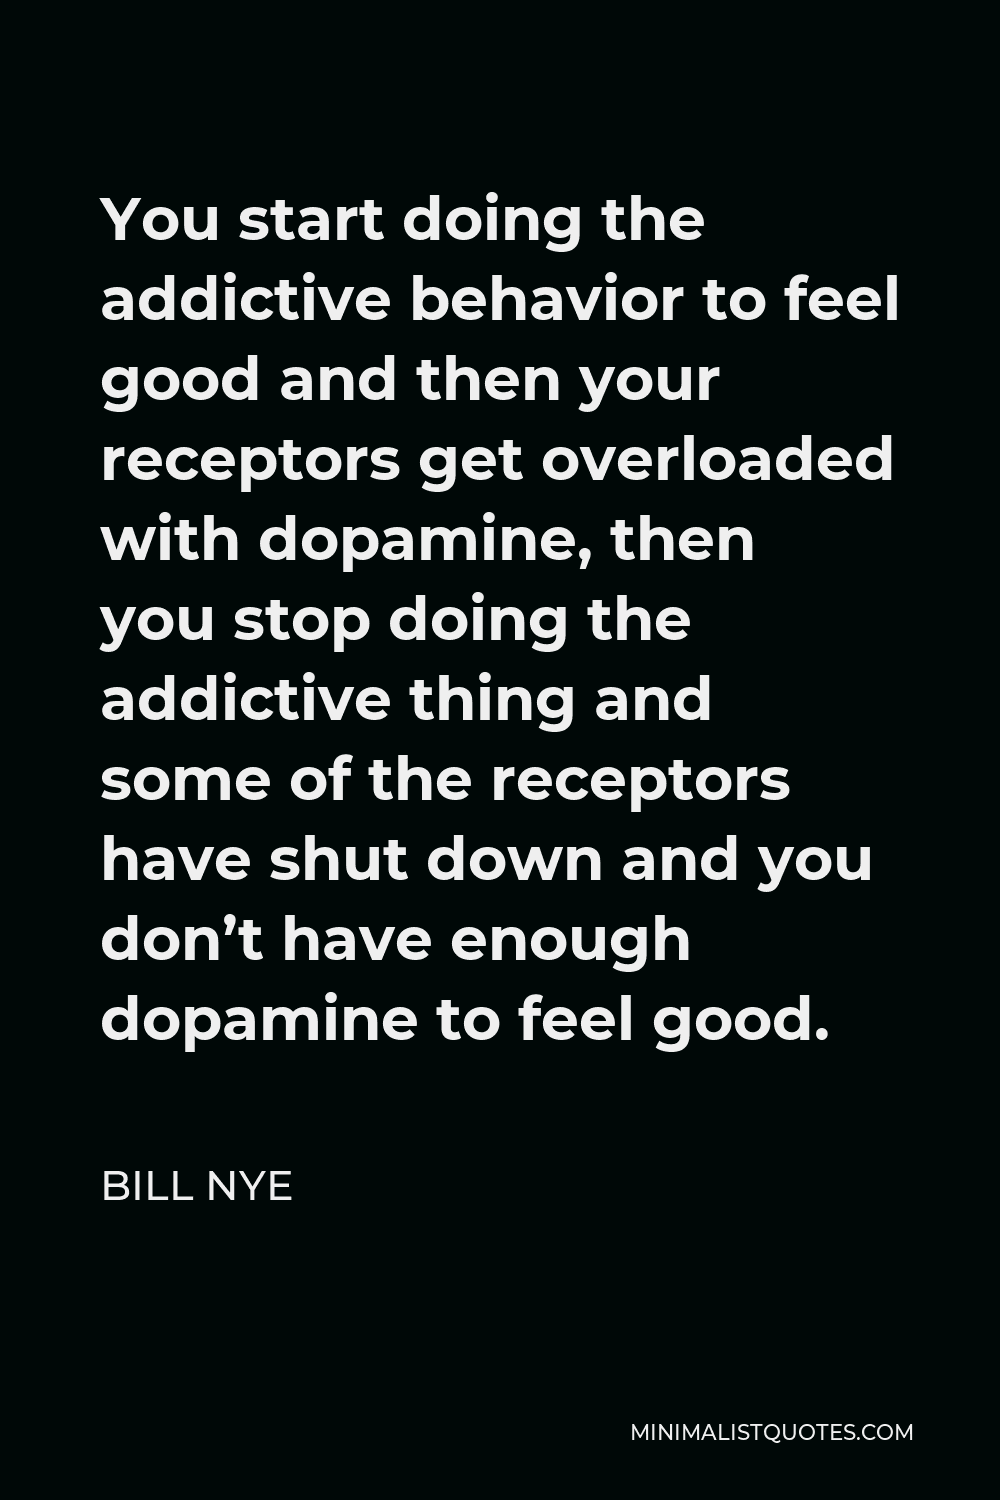 Bill Nye Quote - You start doing the addictive behavior to feel good and then your receptors get overloaded with dopamine, then you stop doing the addictive thing and some of the receptors have shut down and you don’t have enough dopamine to feel good.